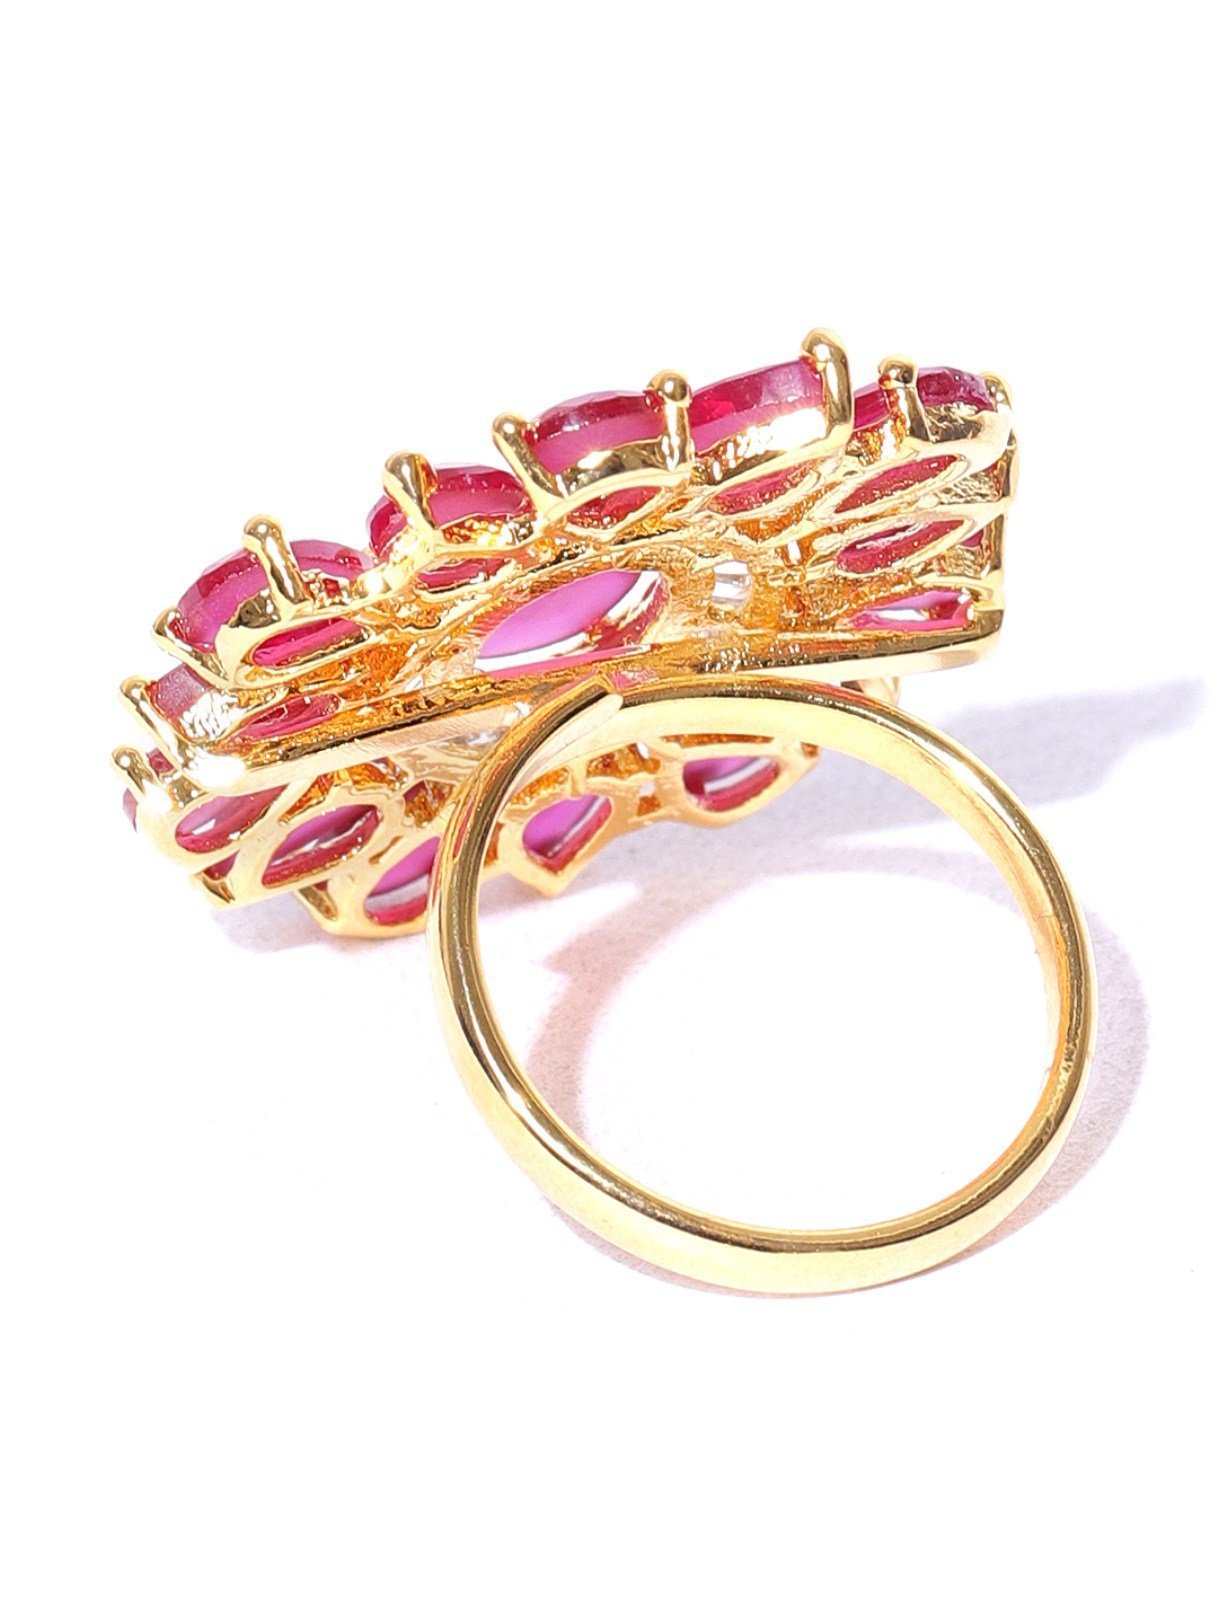 Women's Exclusive Floral Shaped Pink Colour American Diamond Ring For Women And Girls - Priyaasi